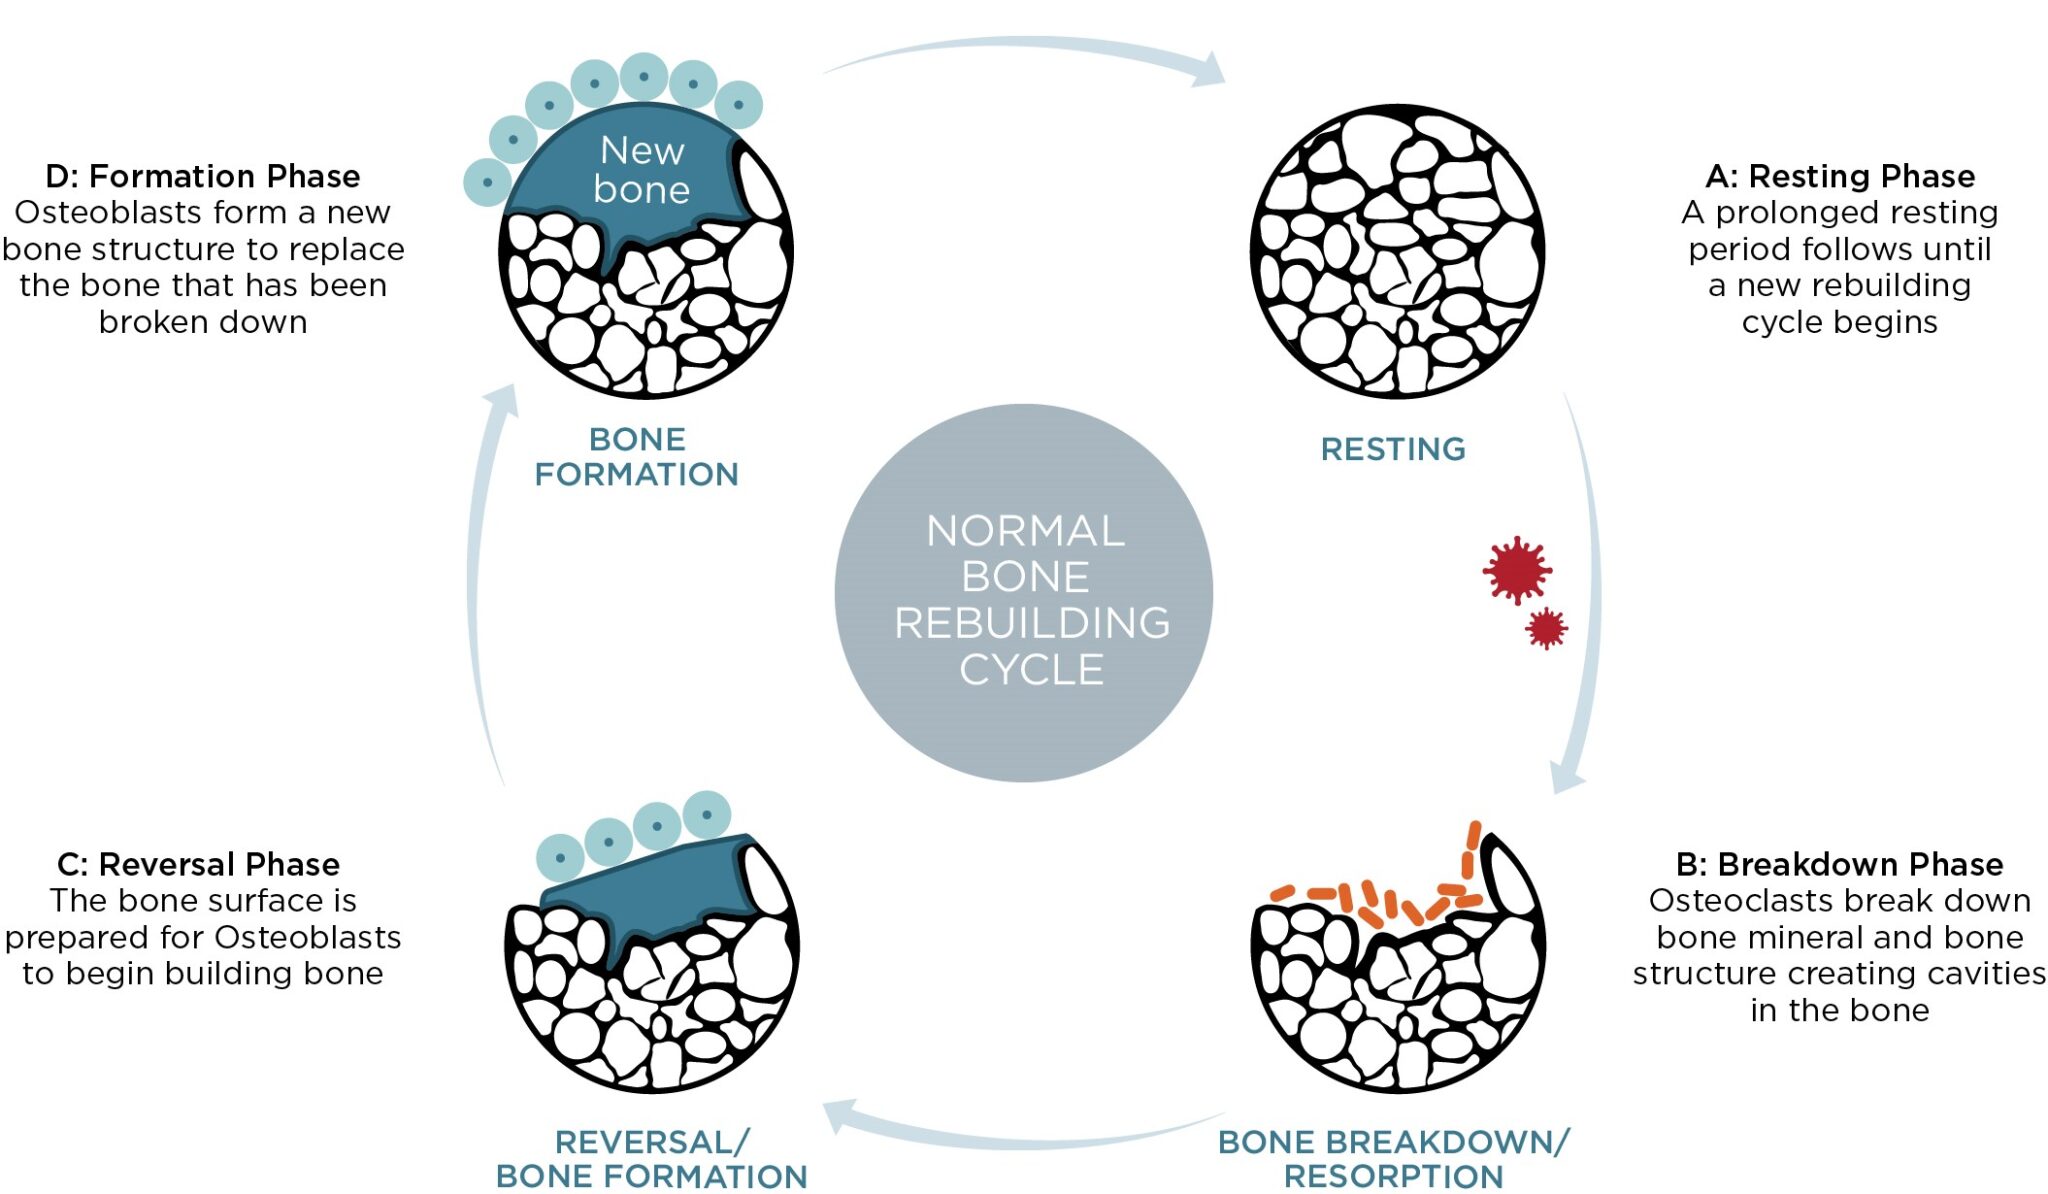 An illustration depicting a normal, healthy Bone Rebuilding Cycle